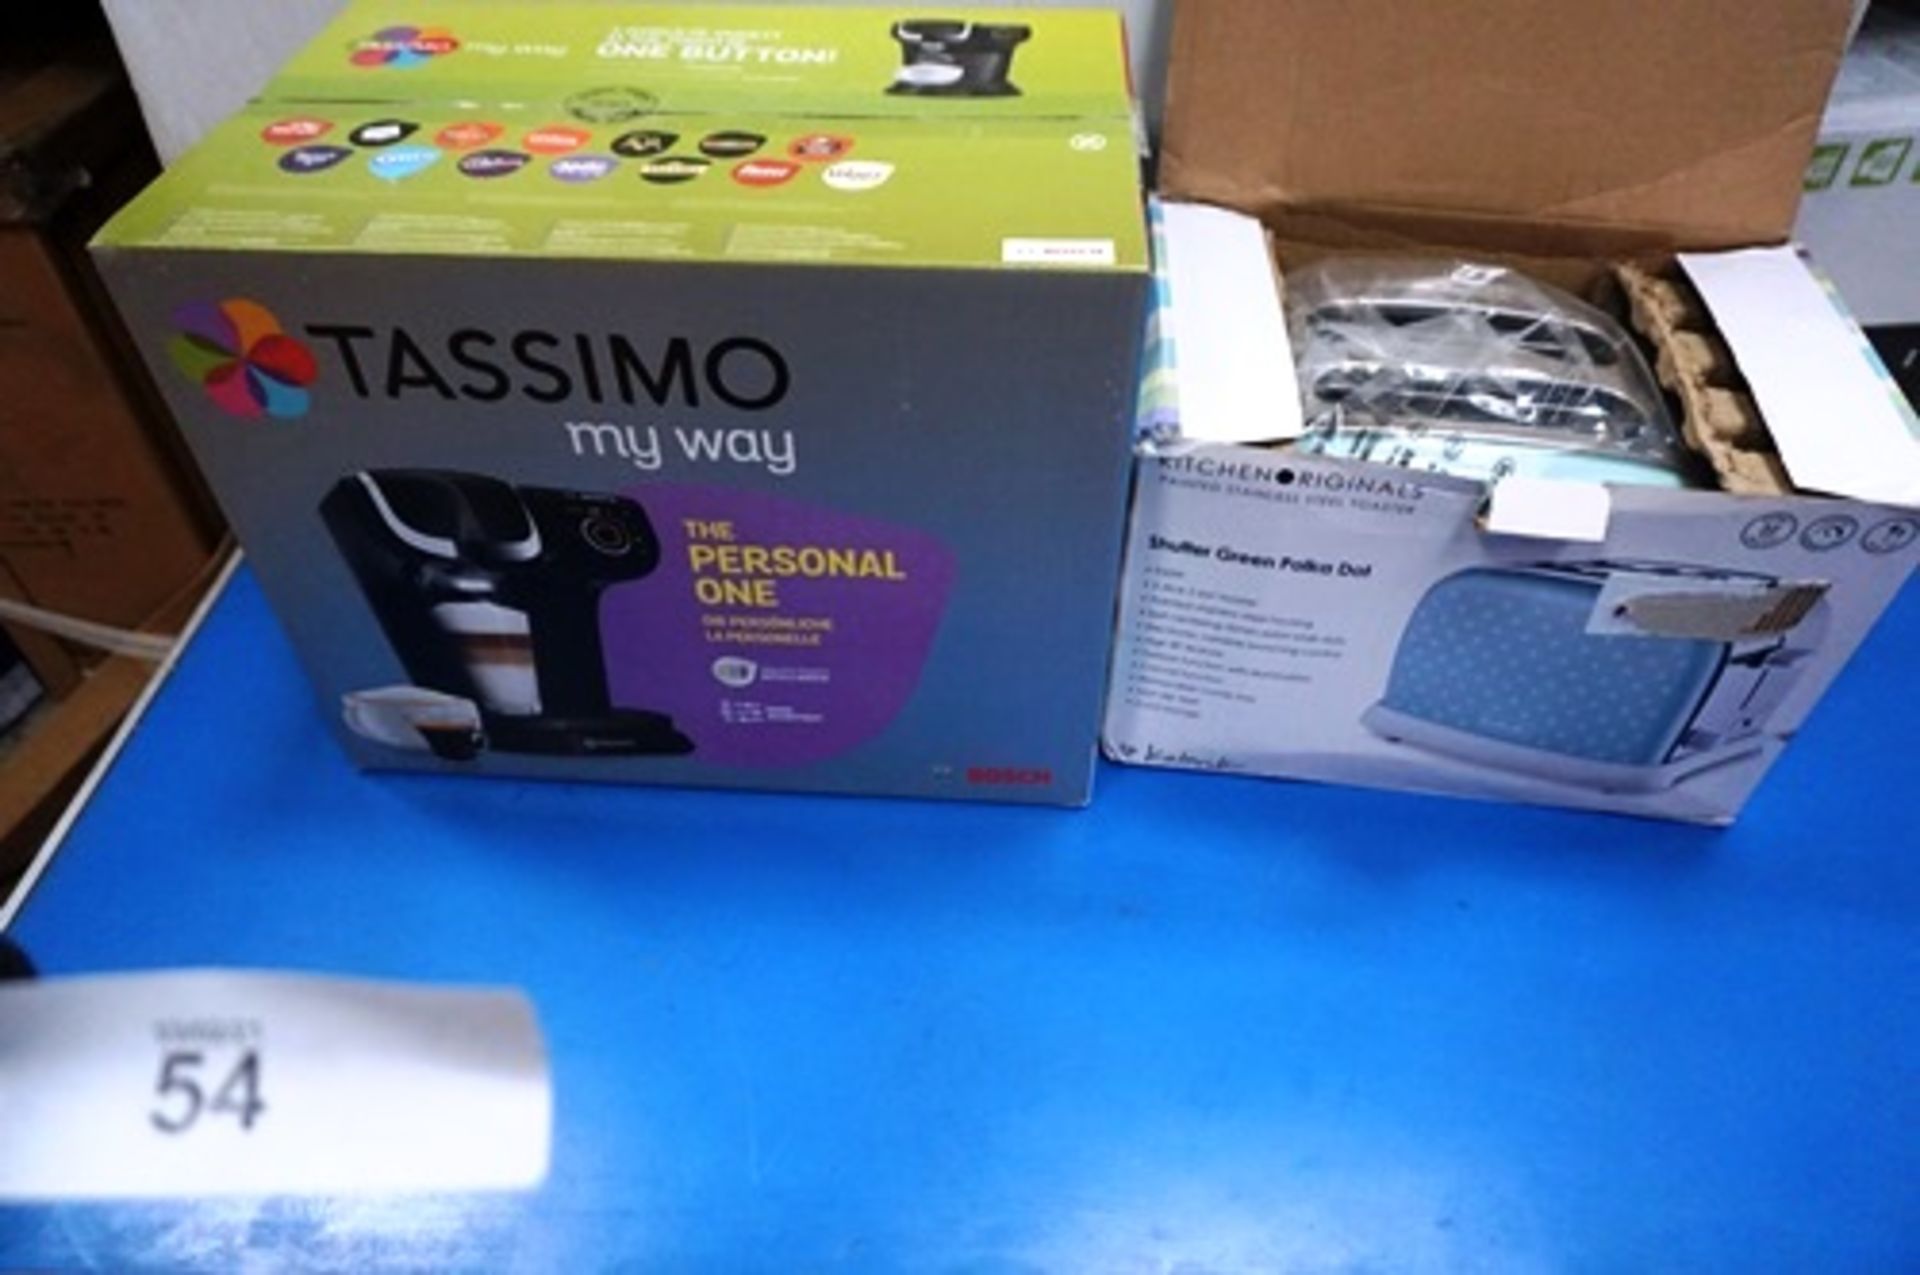 A Tassimo coffee machine, model TAS6002GB together with Polka Dot green 2 slice toaster, model 47334